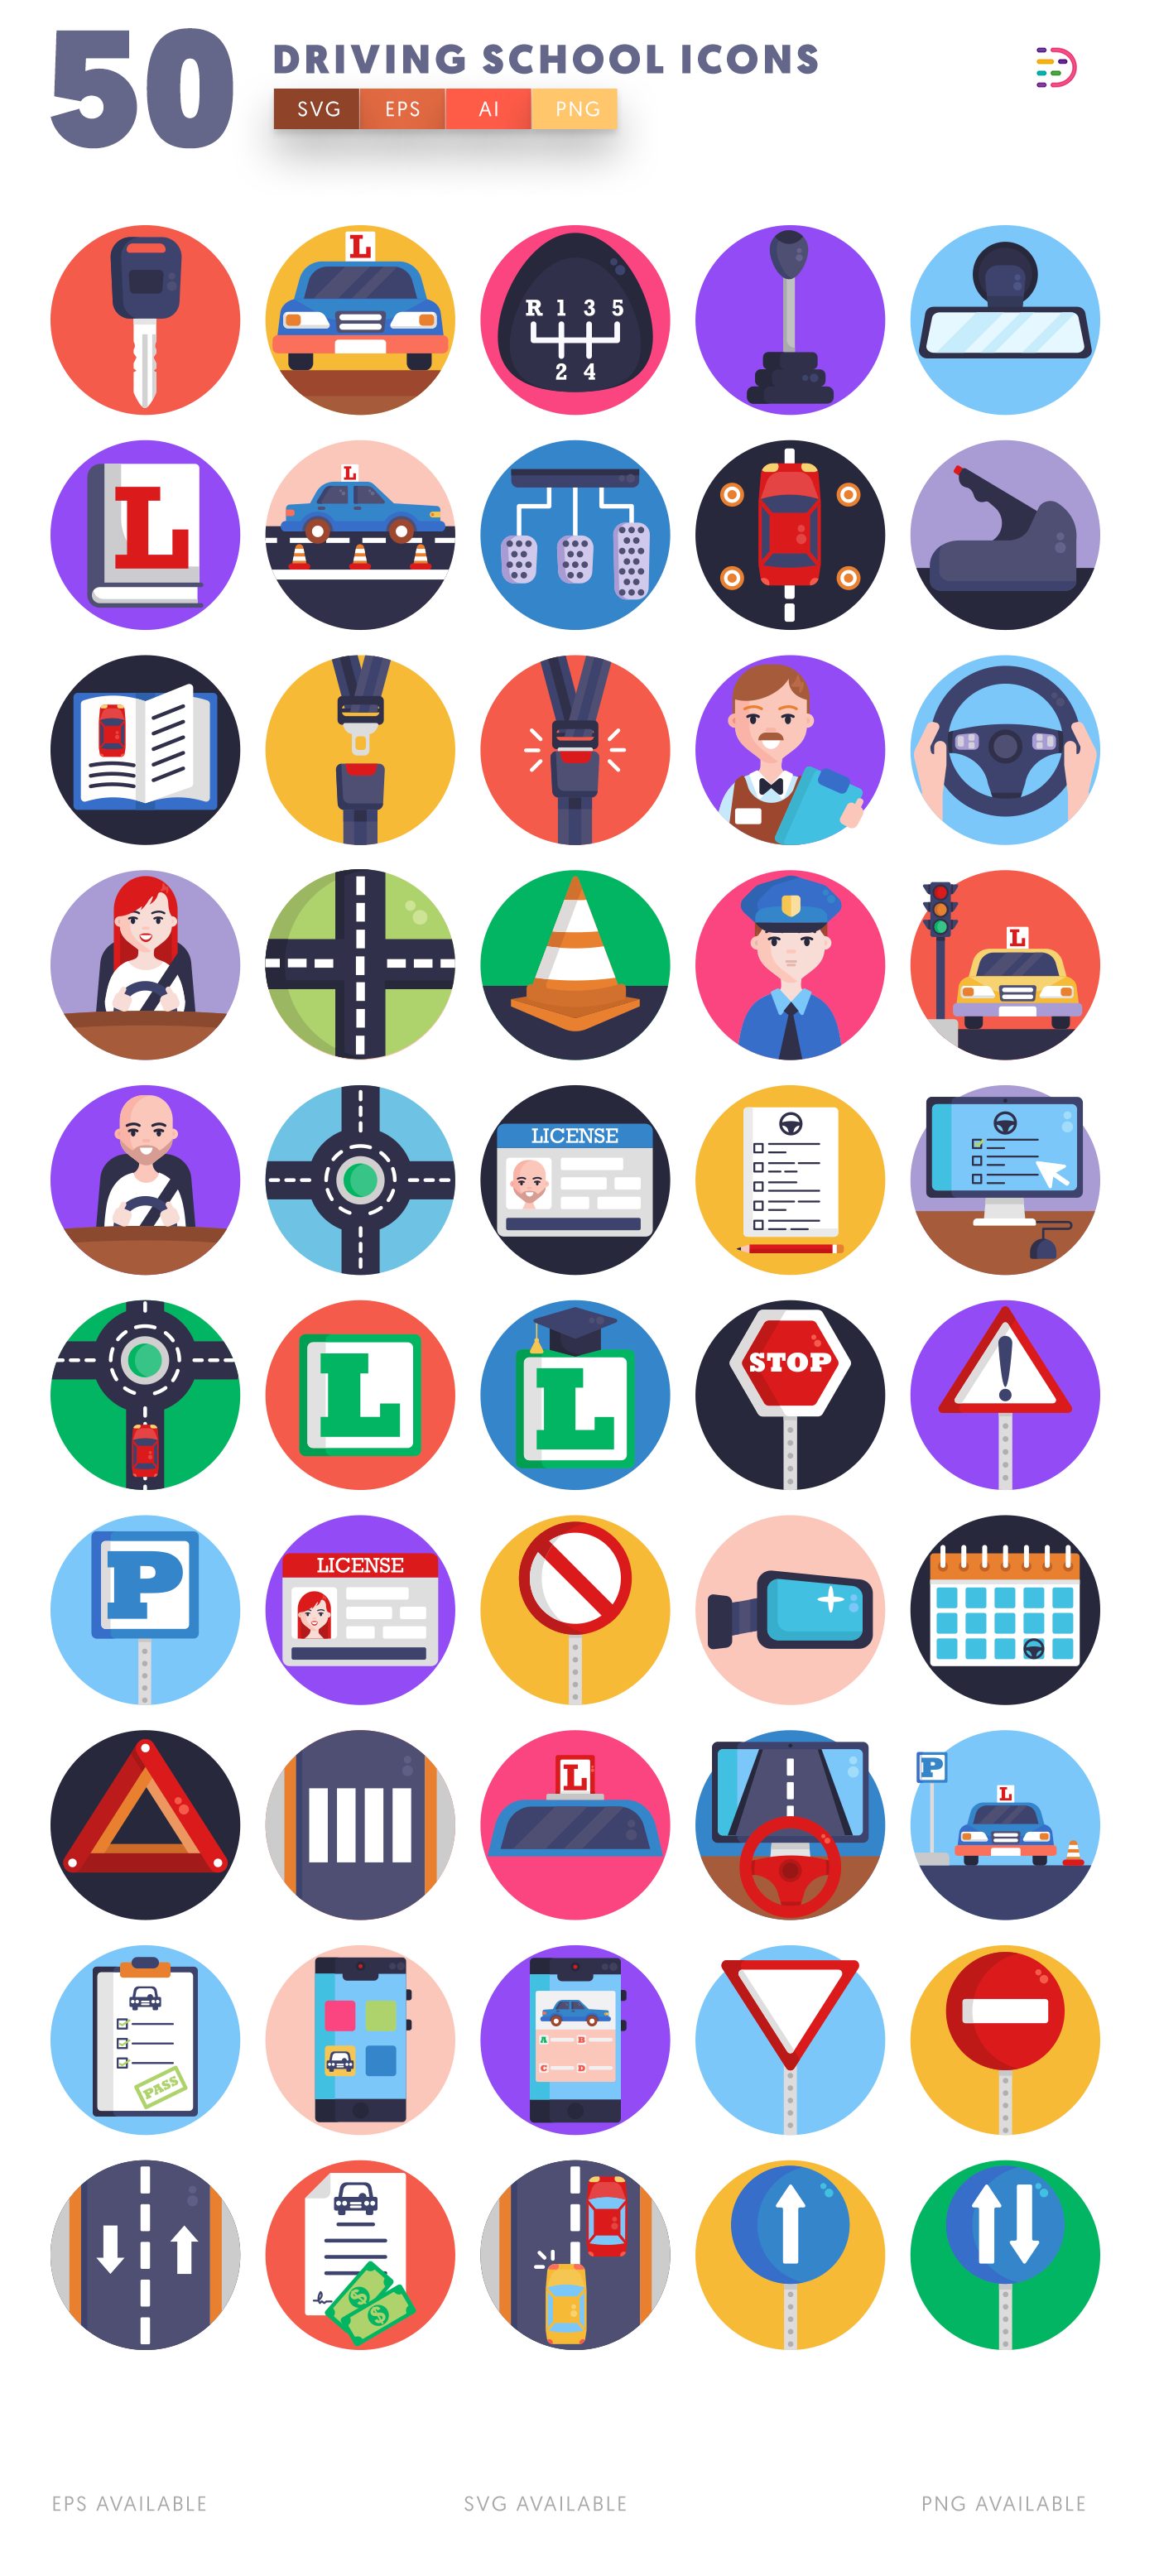 Driving School icon pack